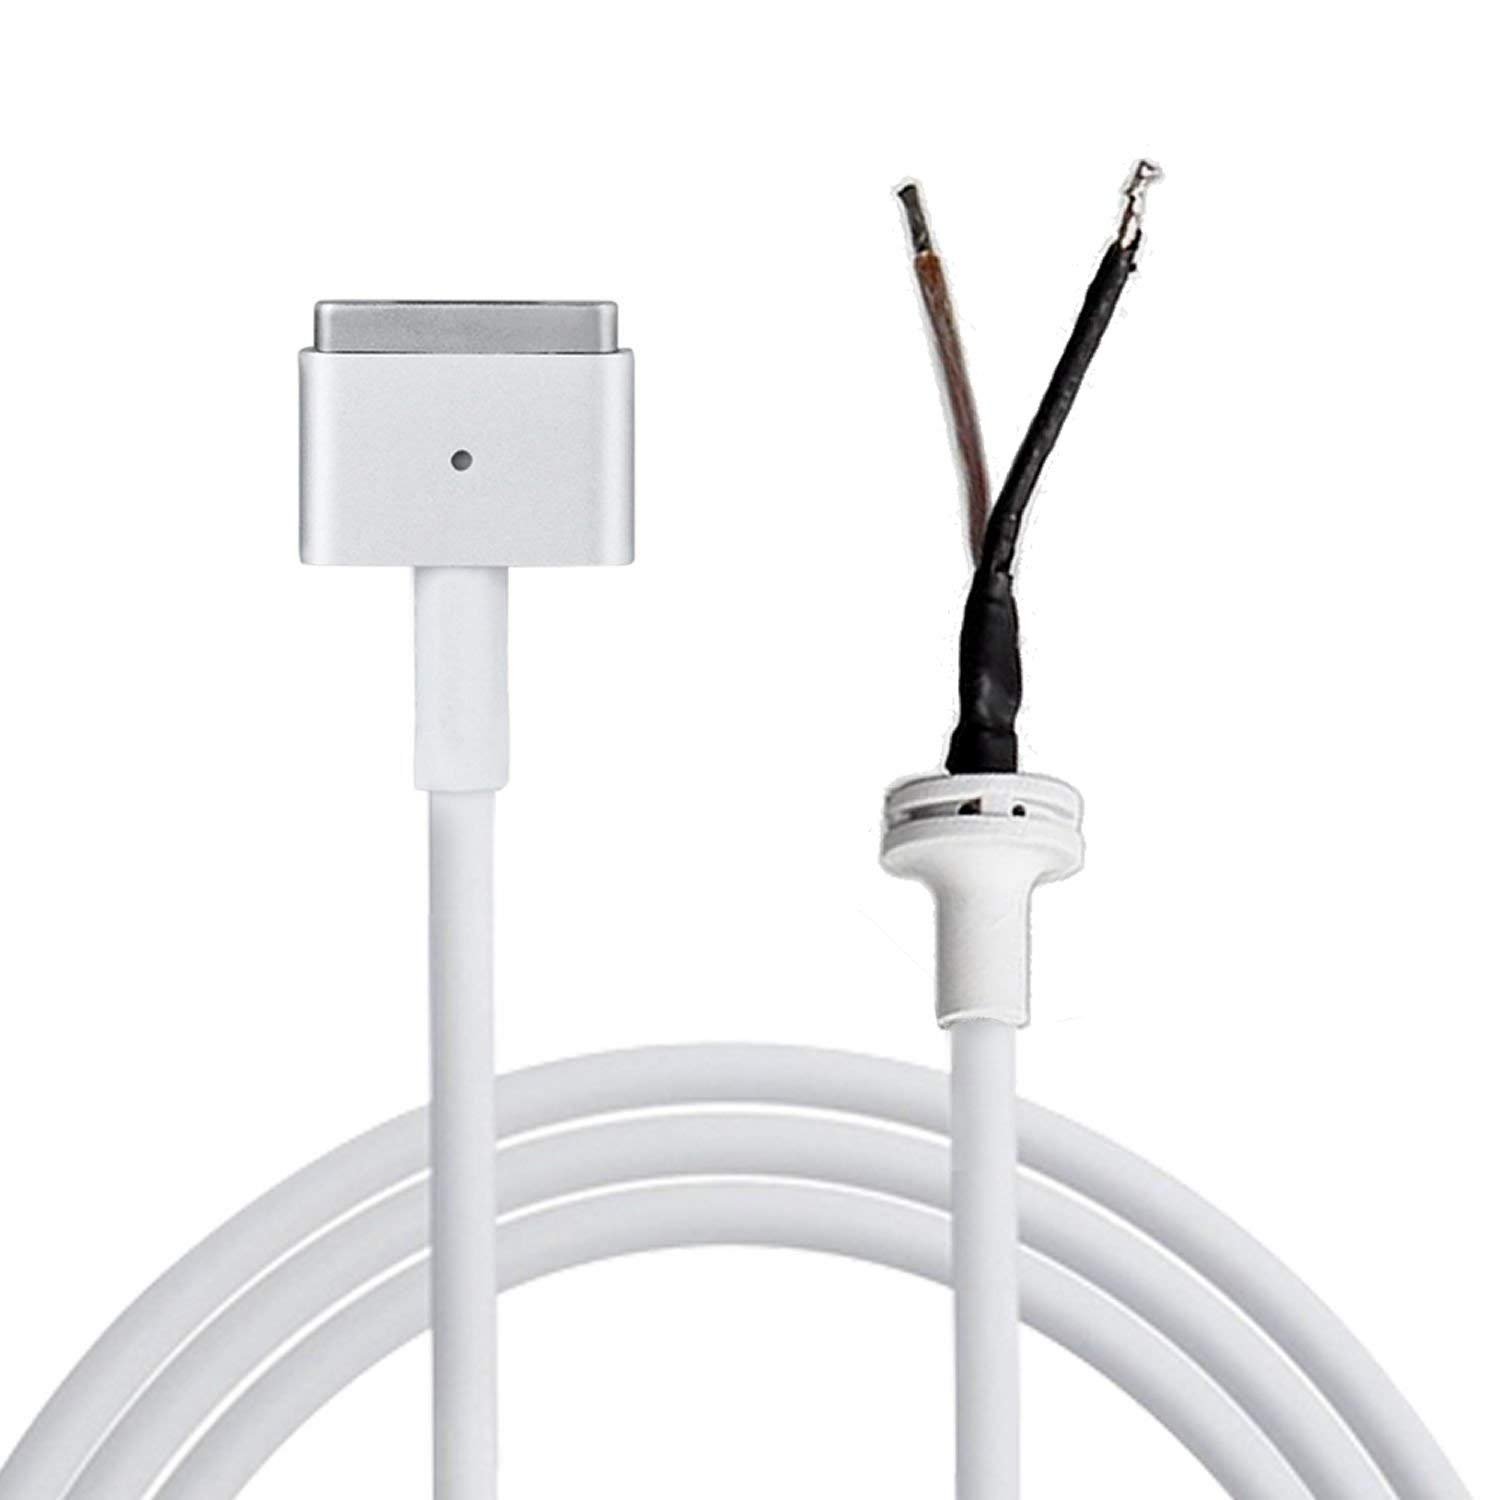 Charging cable for macbook air on amazon prime